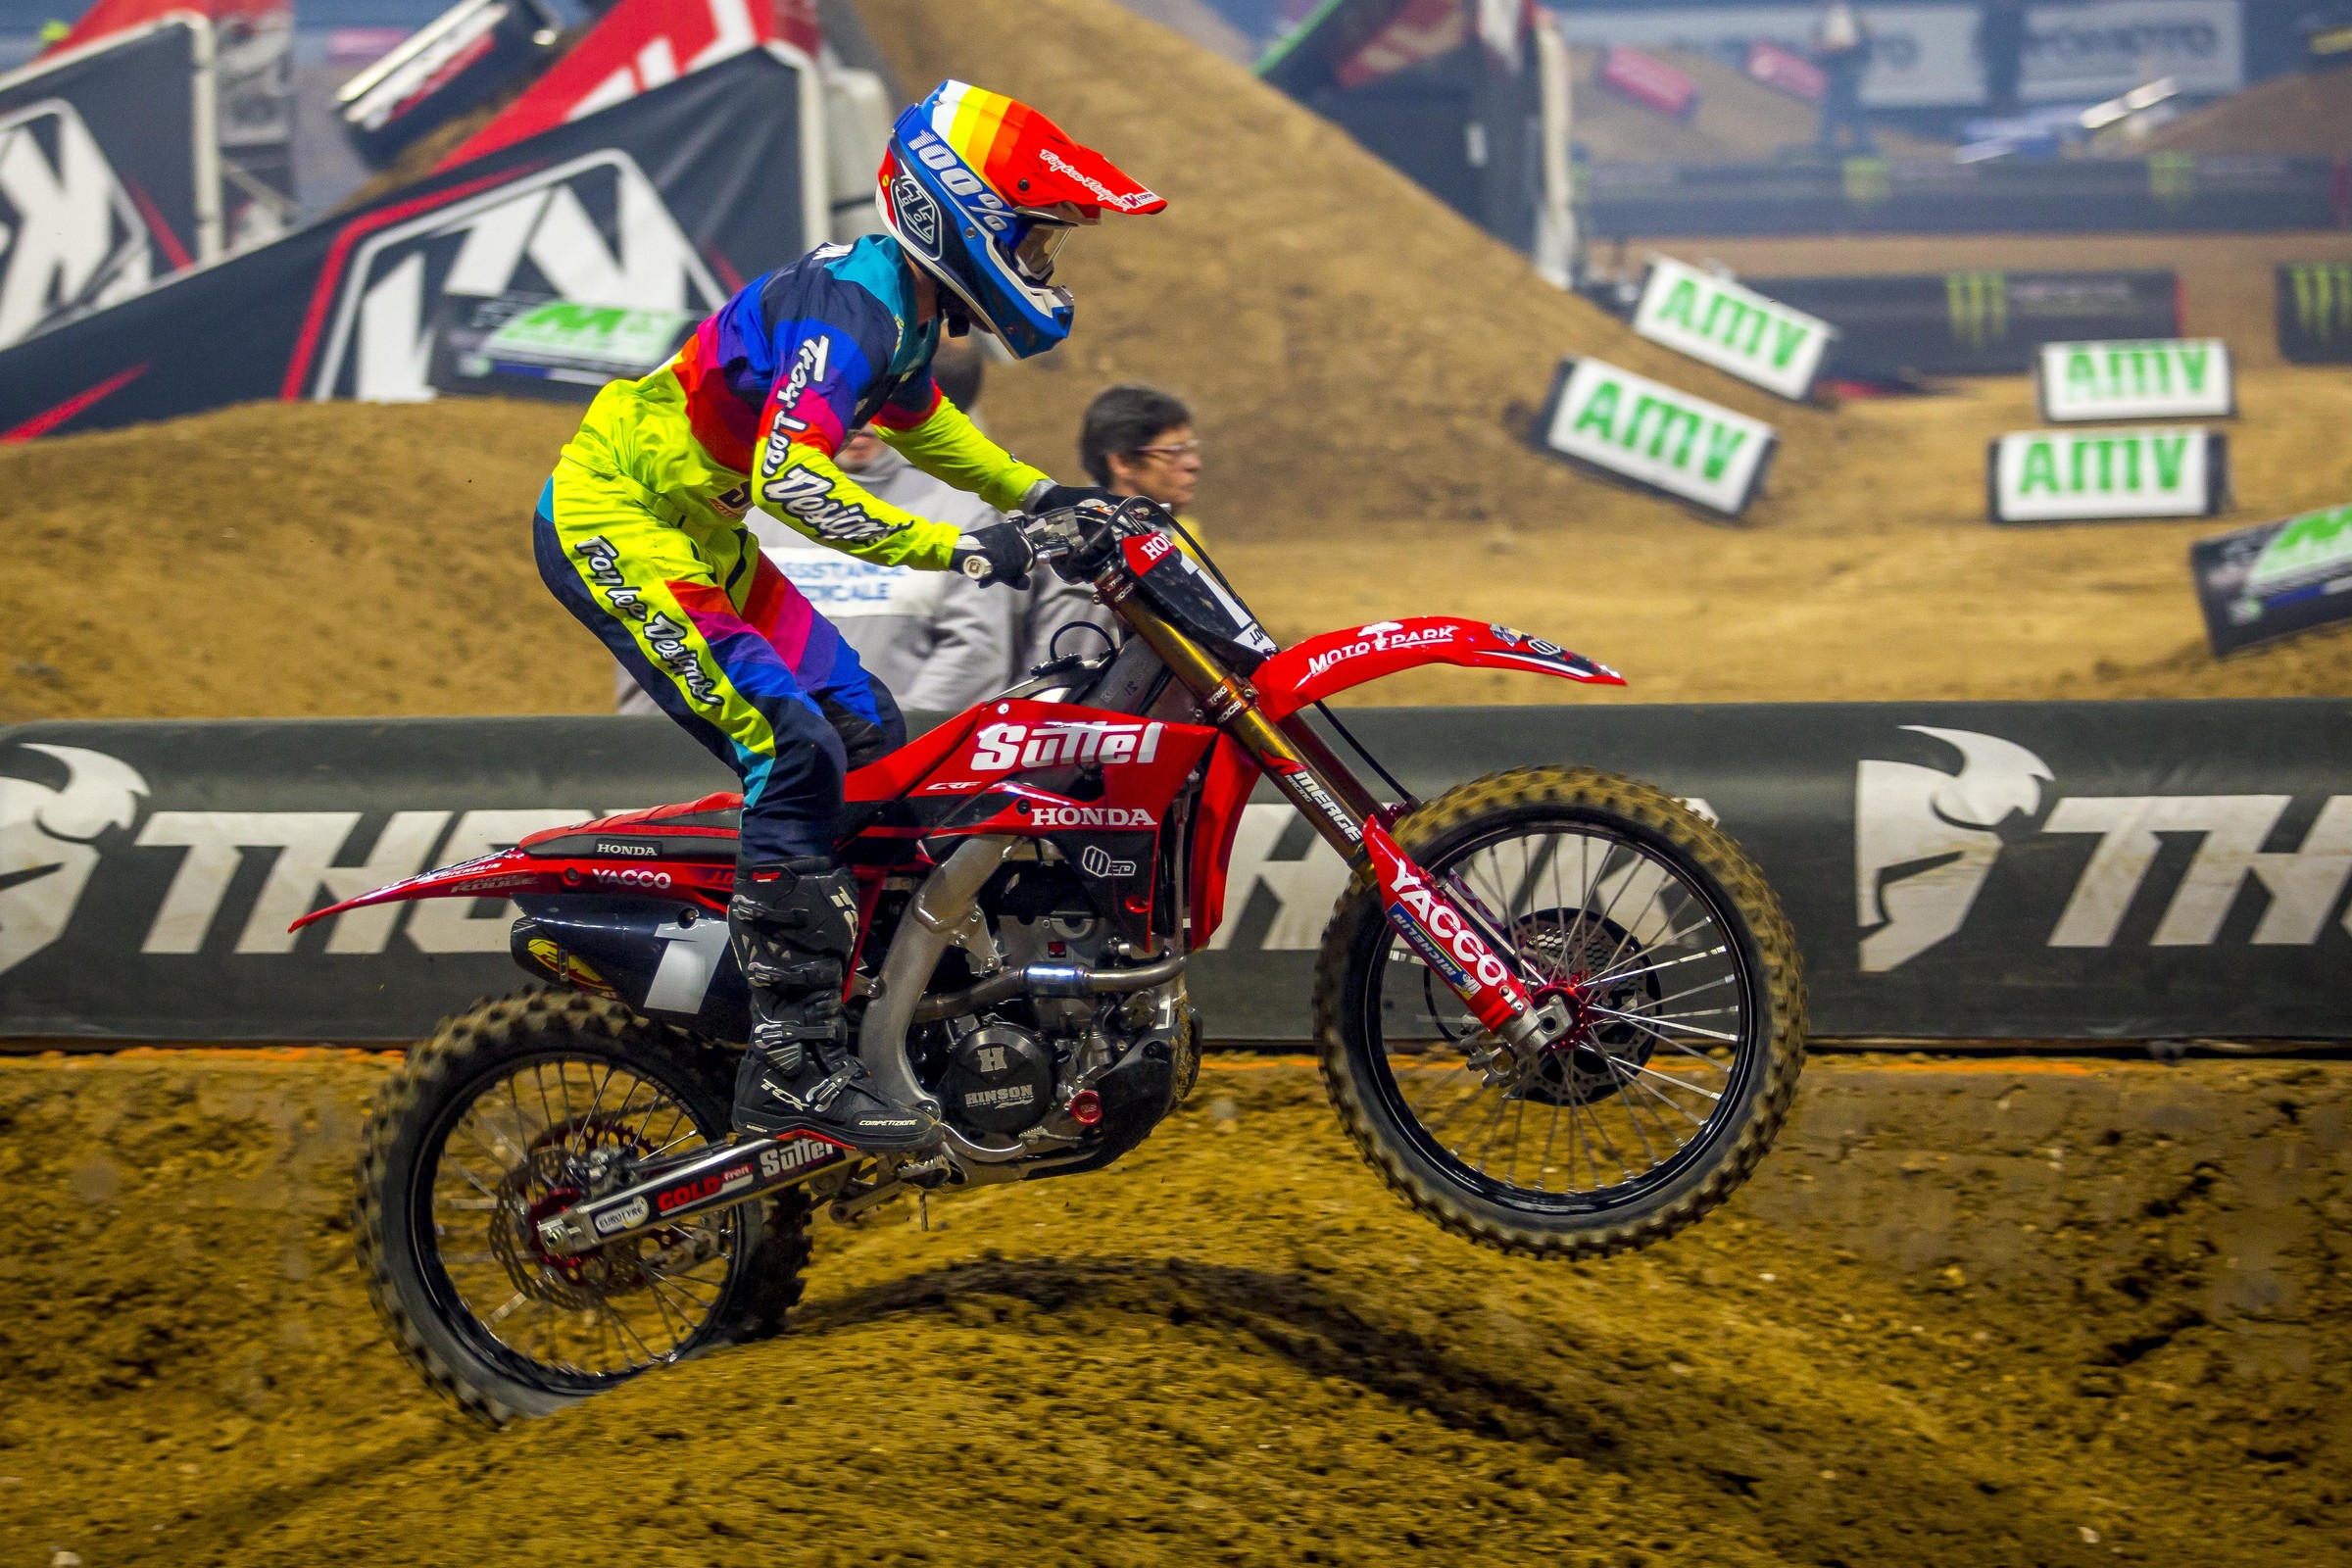 jason ciarletta was a 19-year-old professional supercross racer